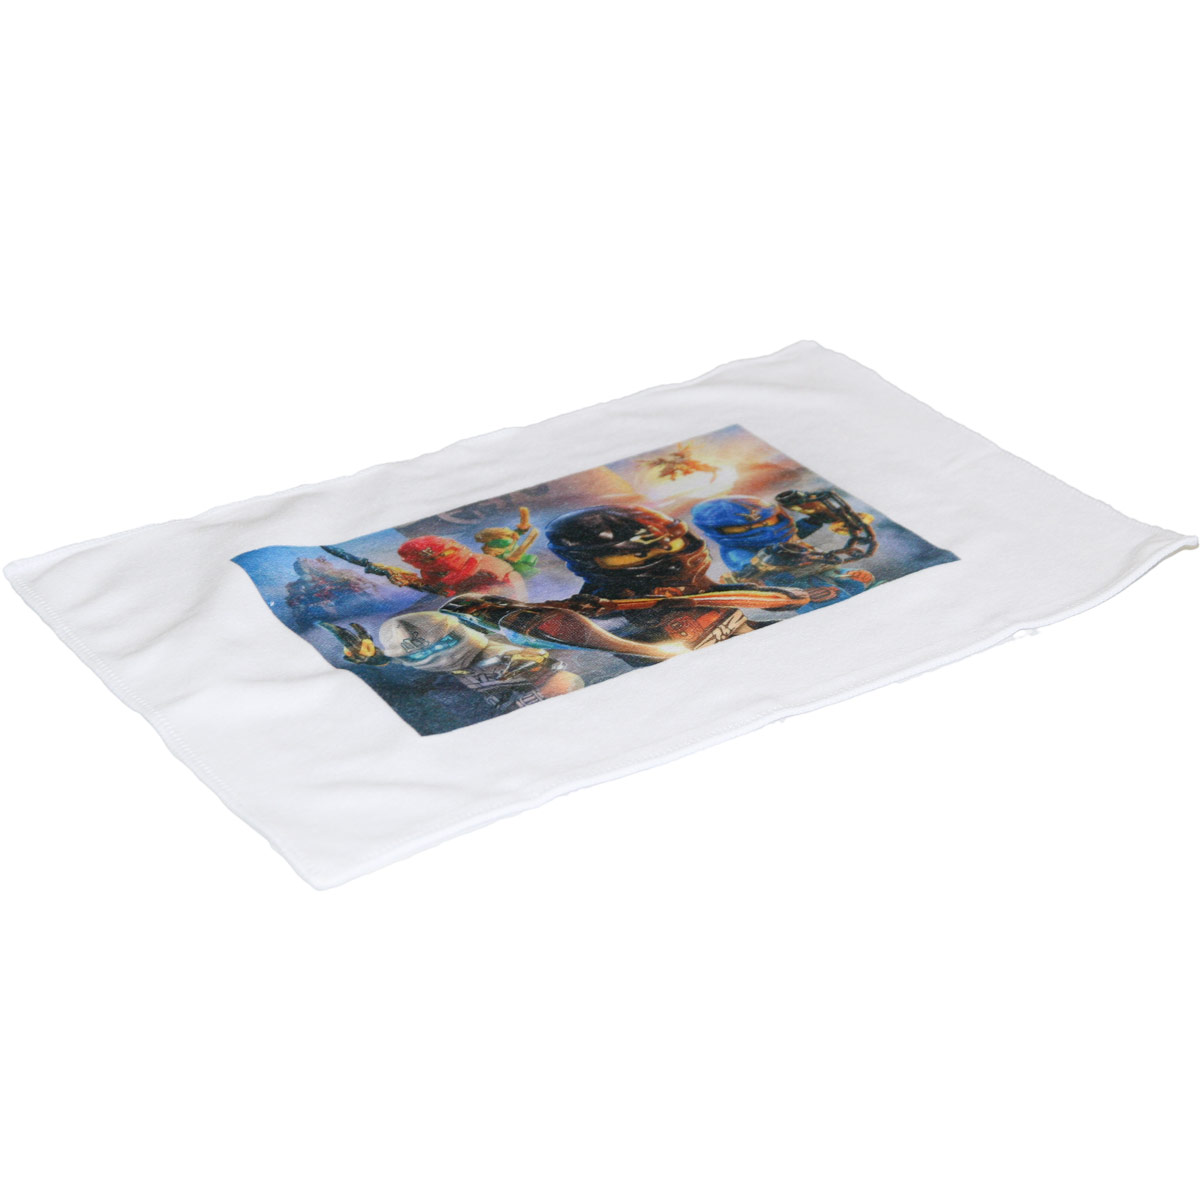 Towel for sublimation